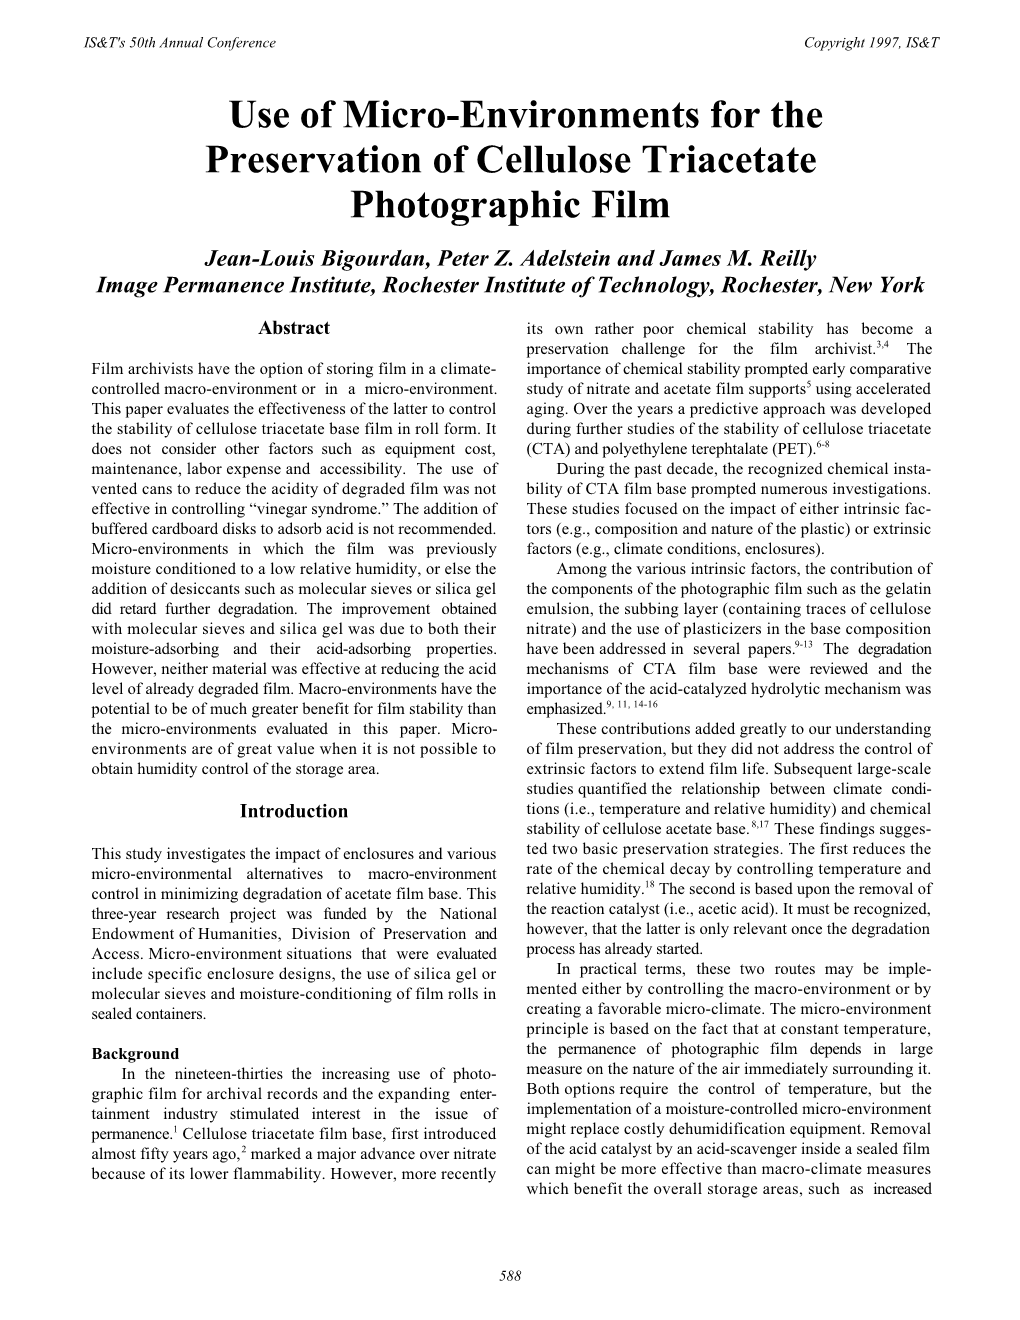 Use of Micro-Environments for the Preservation of Cellulose Triacetate Photographic Film Jean-Louis Bigourdan, Peter Z